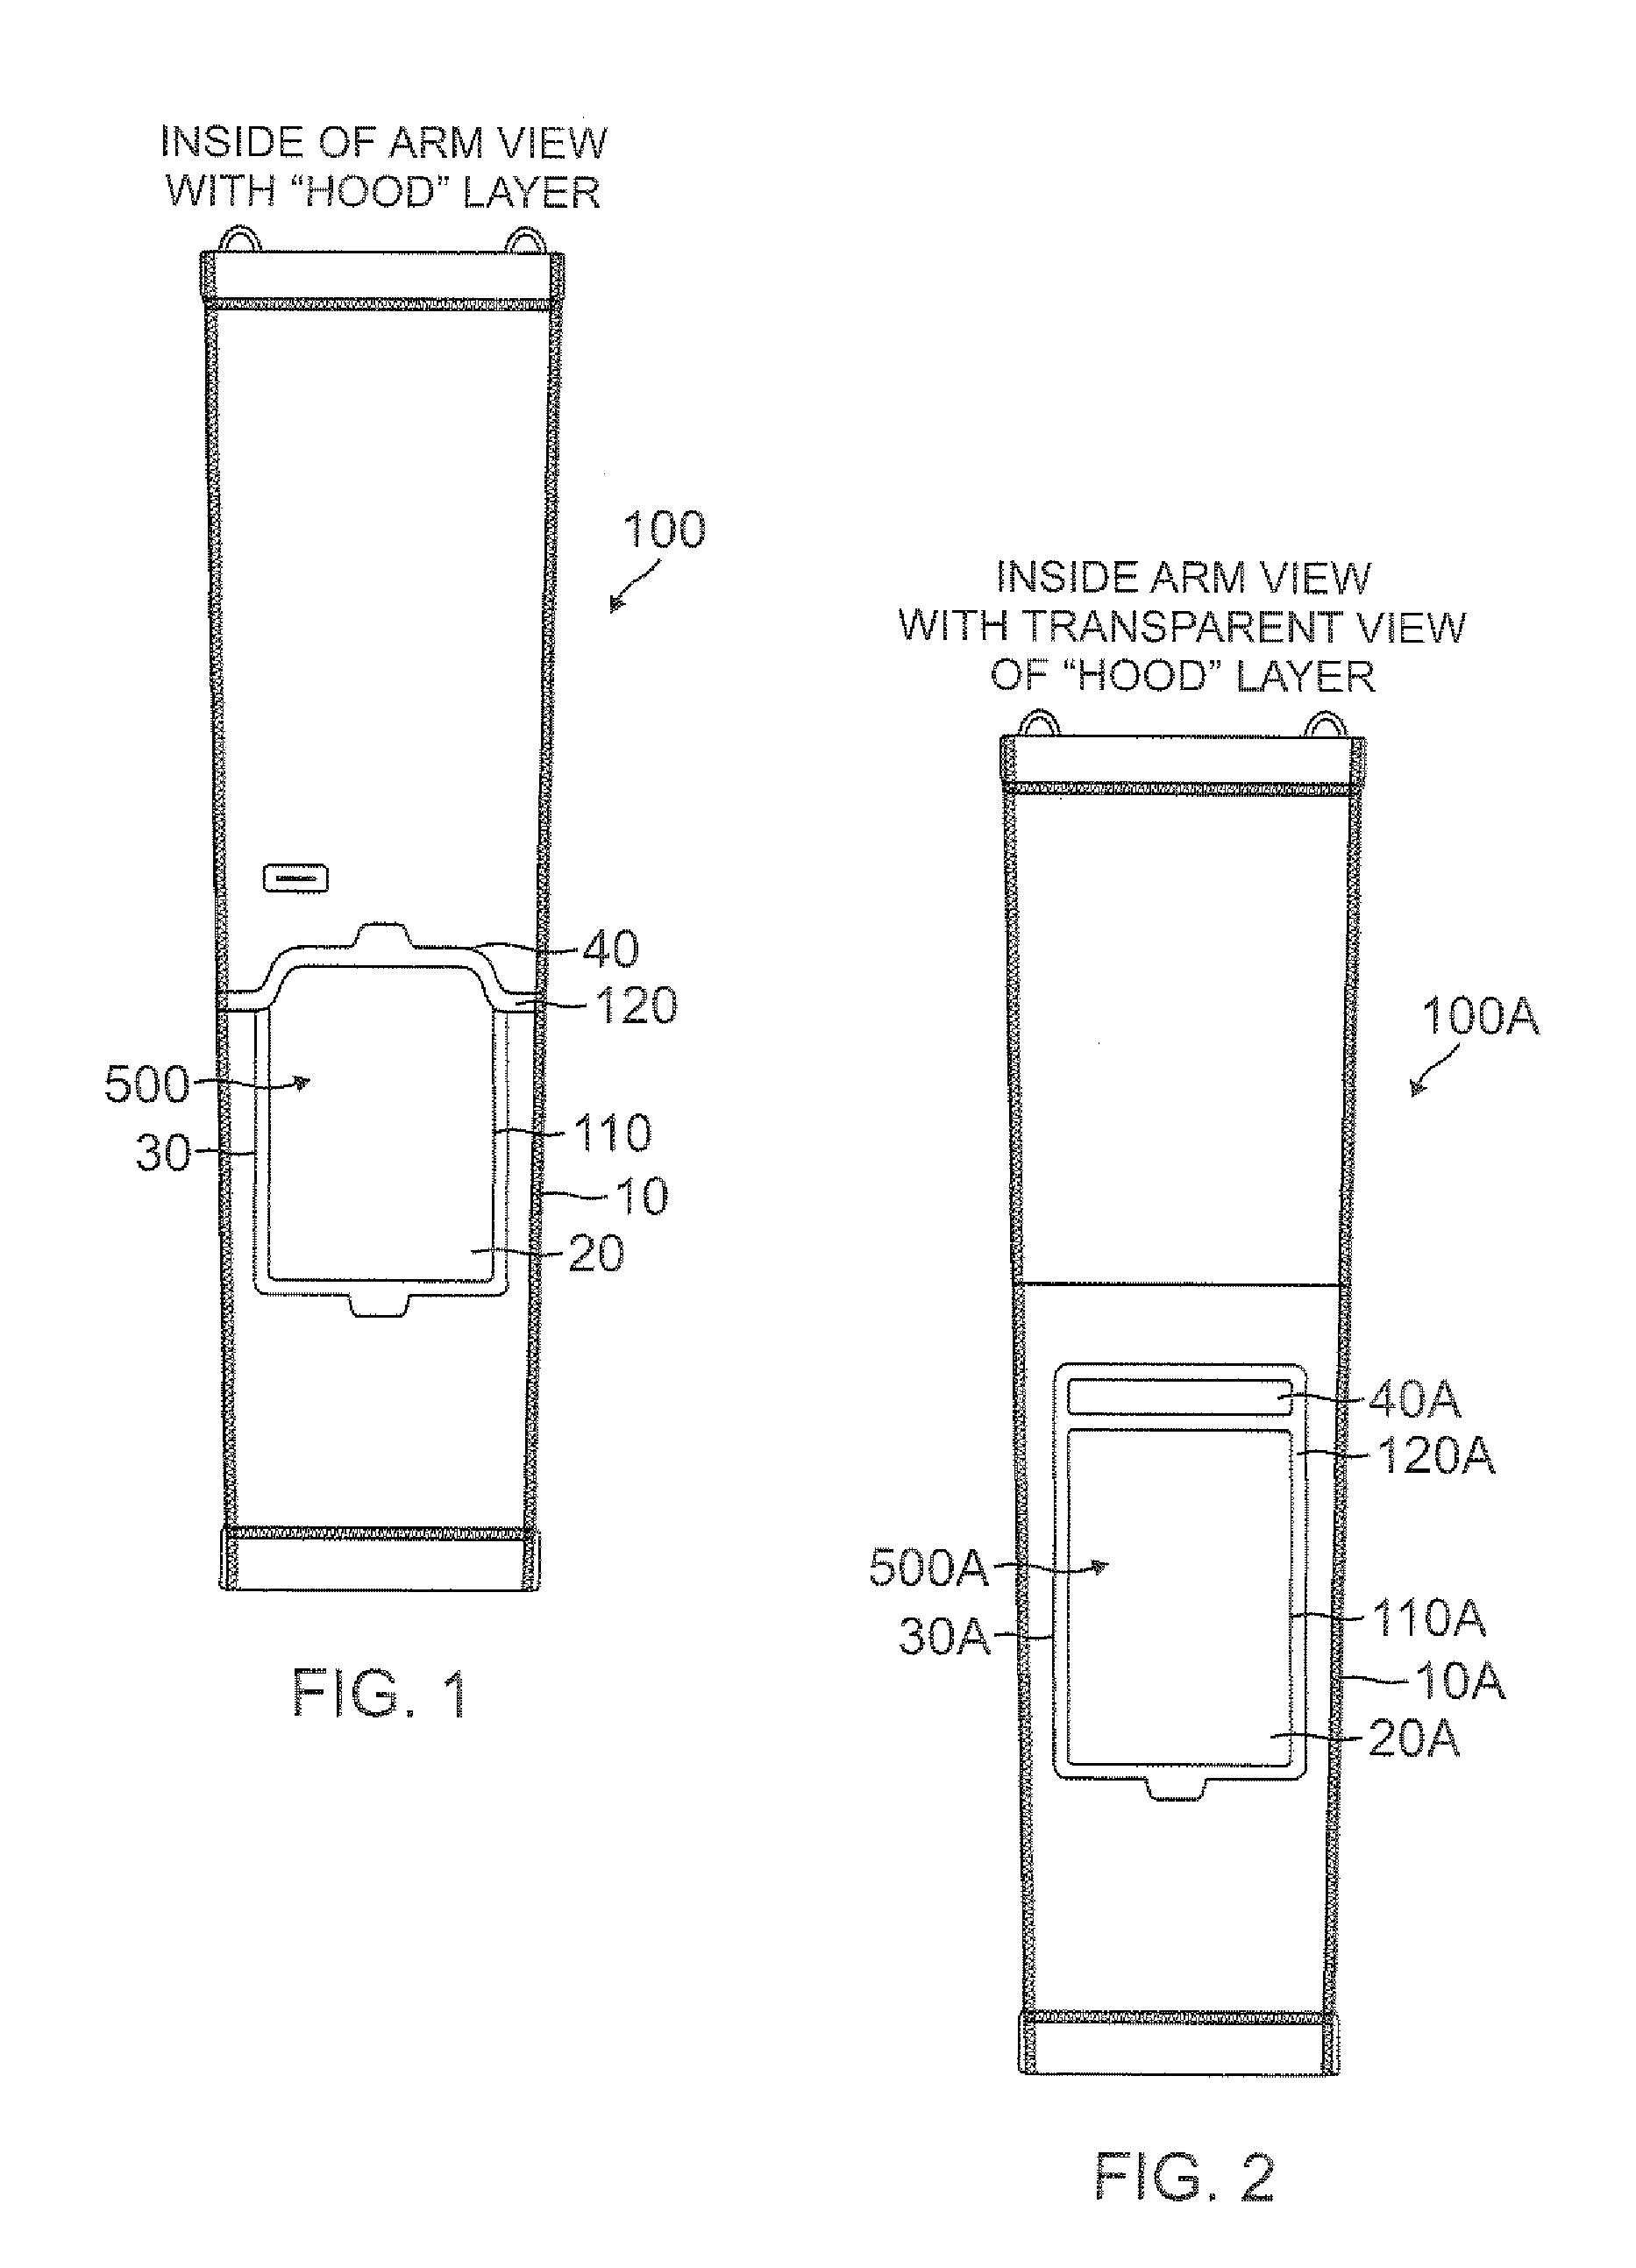 Compression sleeve for retaining electronic devices in an operable format while an individual is wearing the sleeve and engaging in physical activities